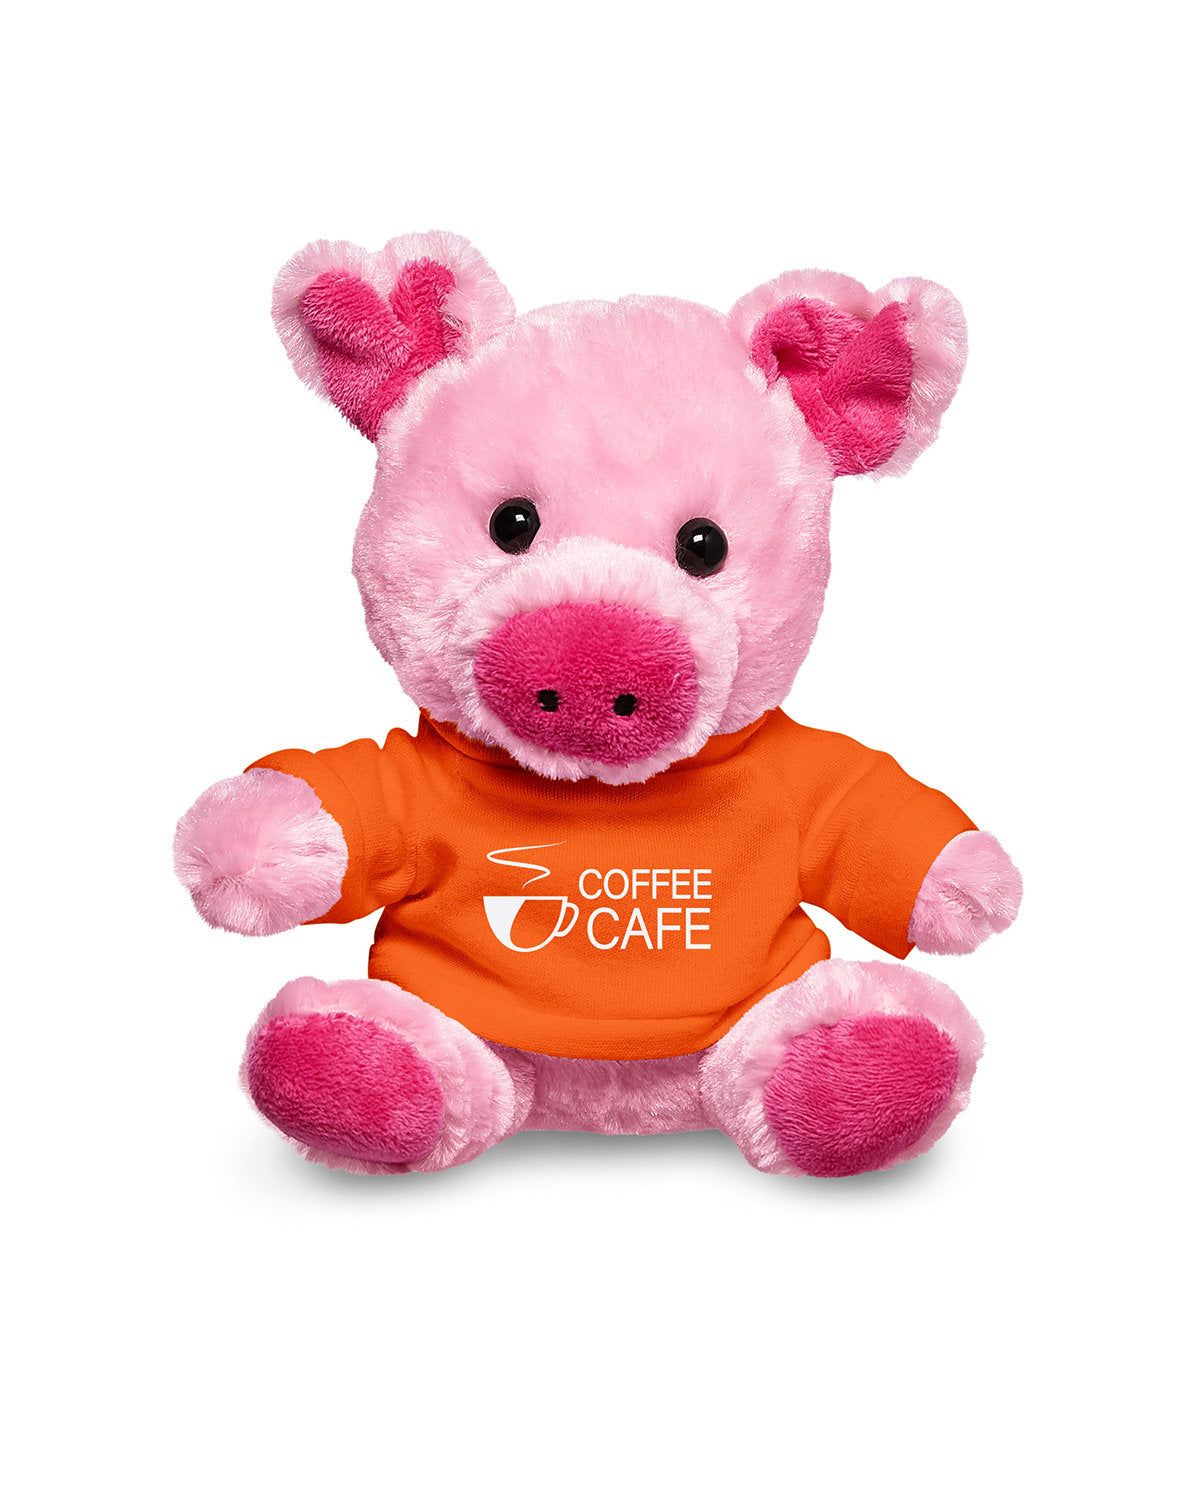 7" Plush Pig With T-Shirt